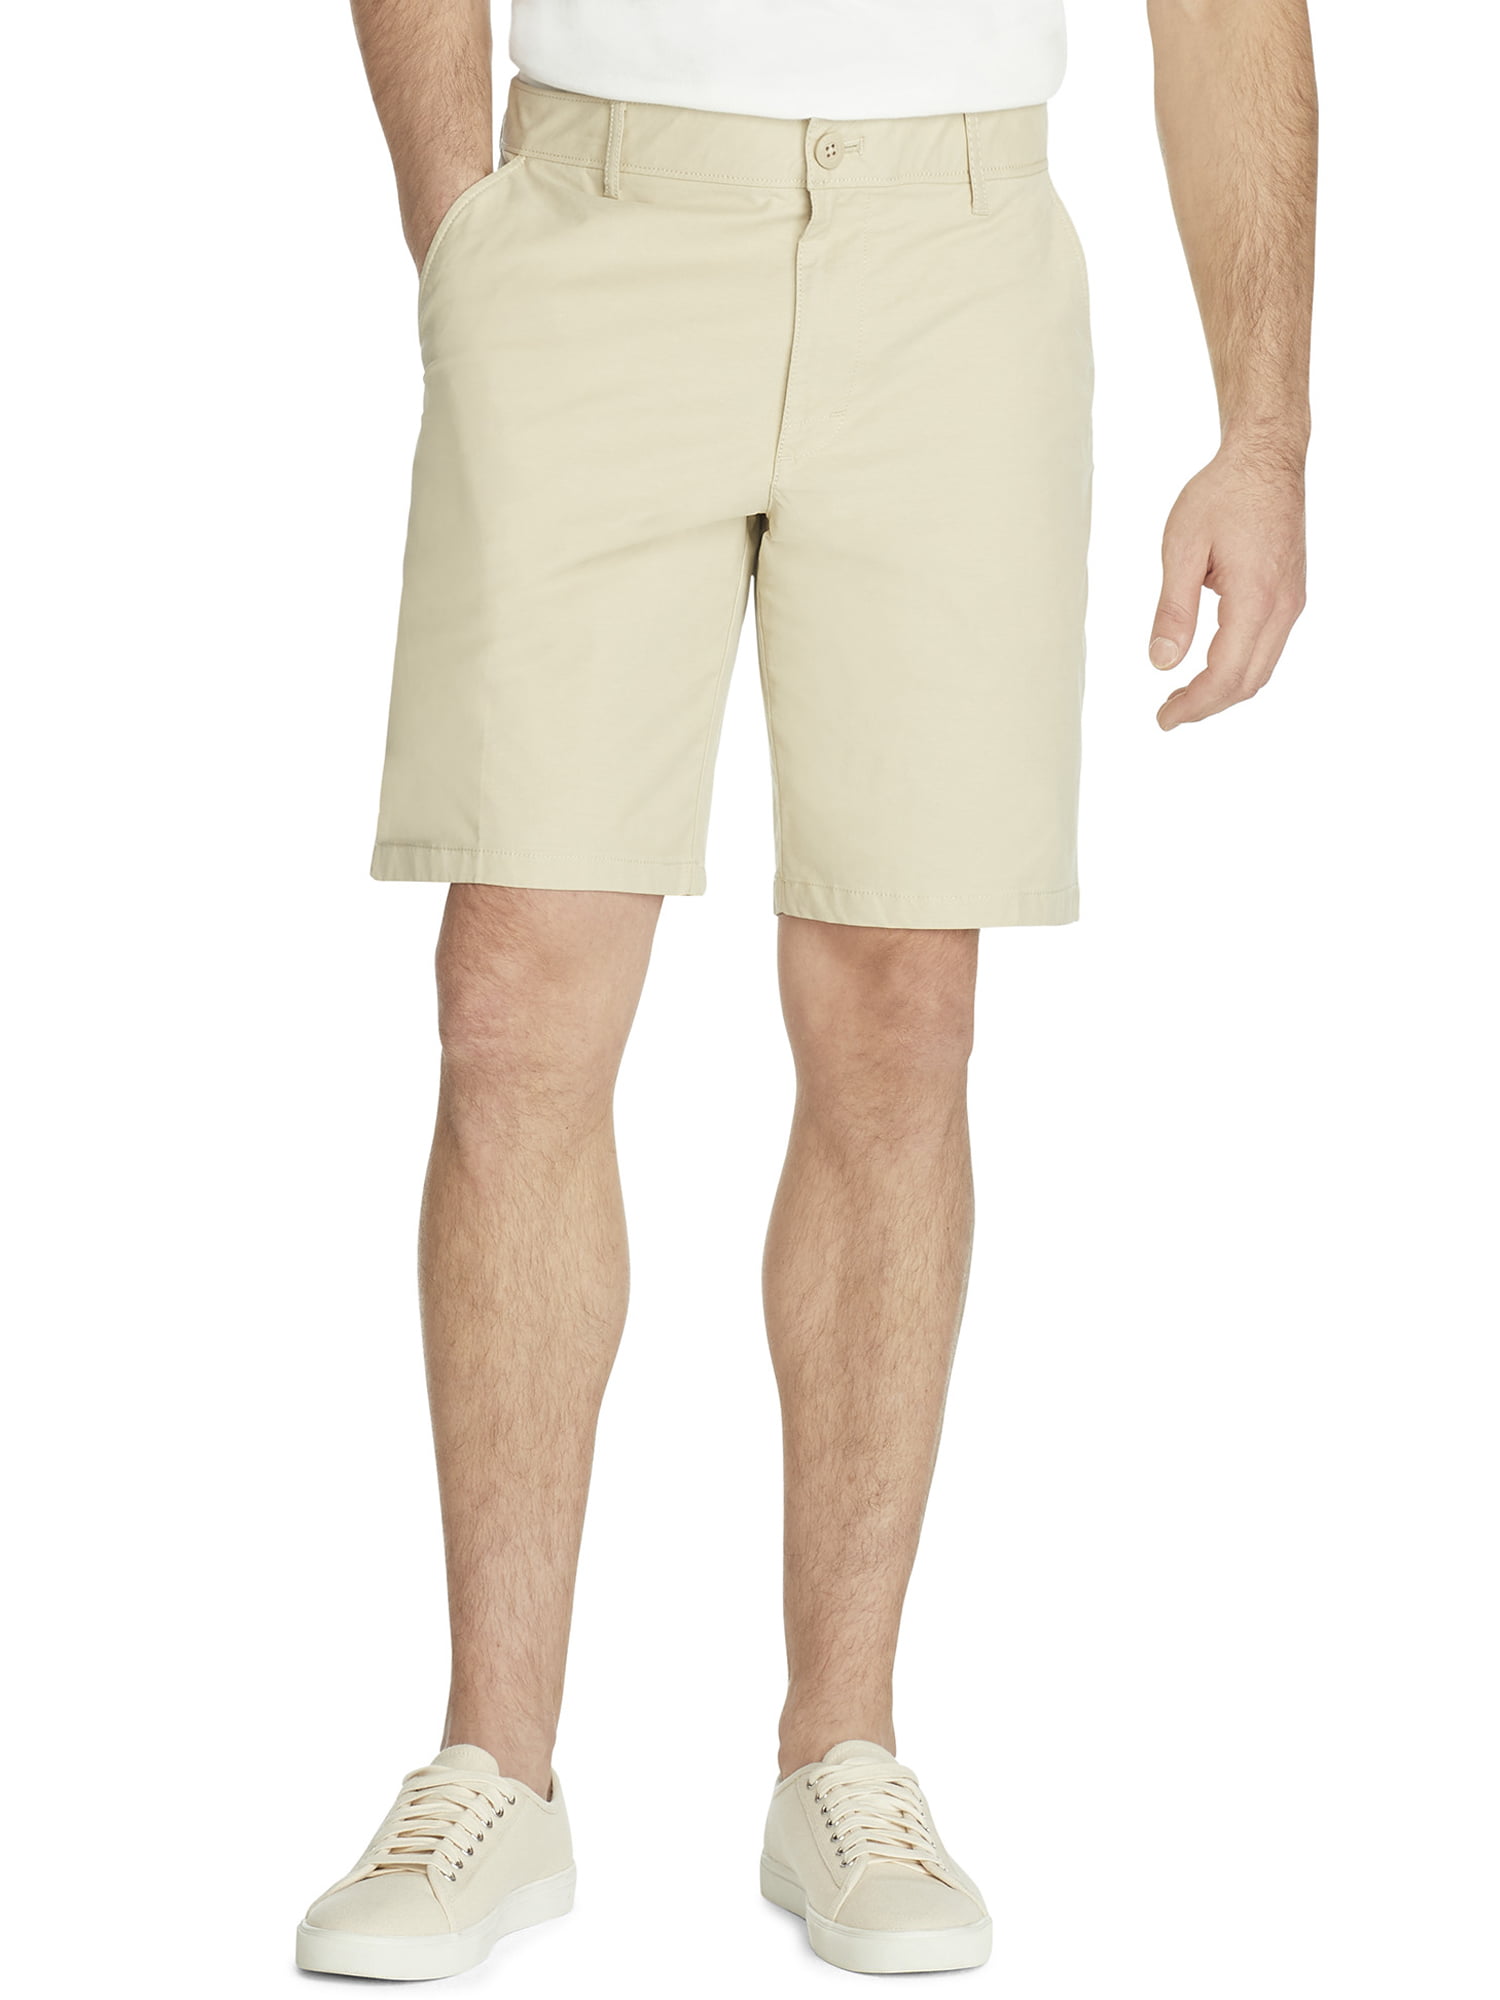 This is Not A Drill Mens Athletic Classic Summer Shorts Casual Swim Shorts with Pockets